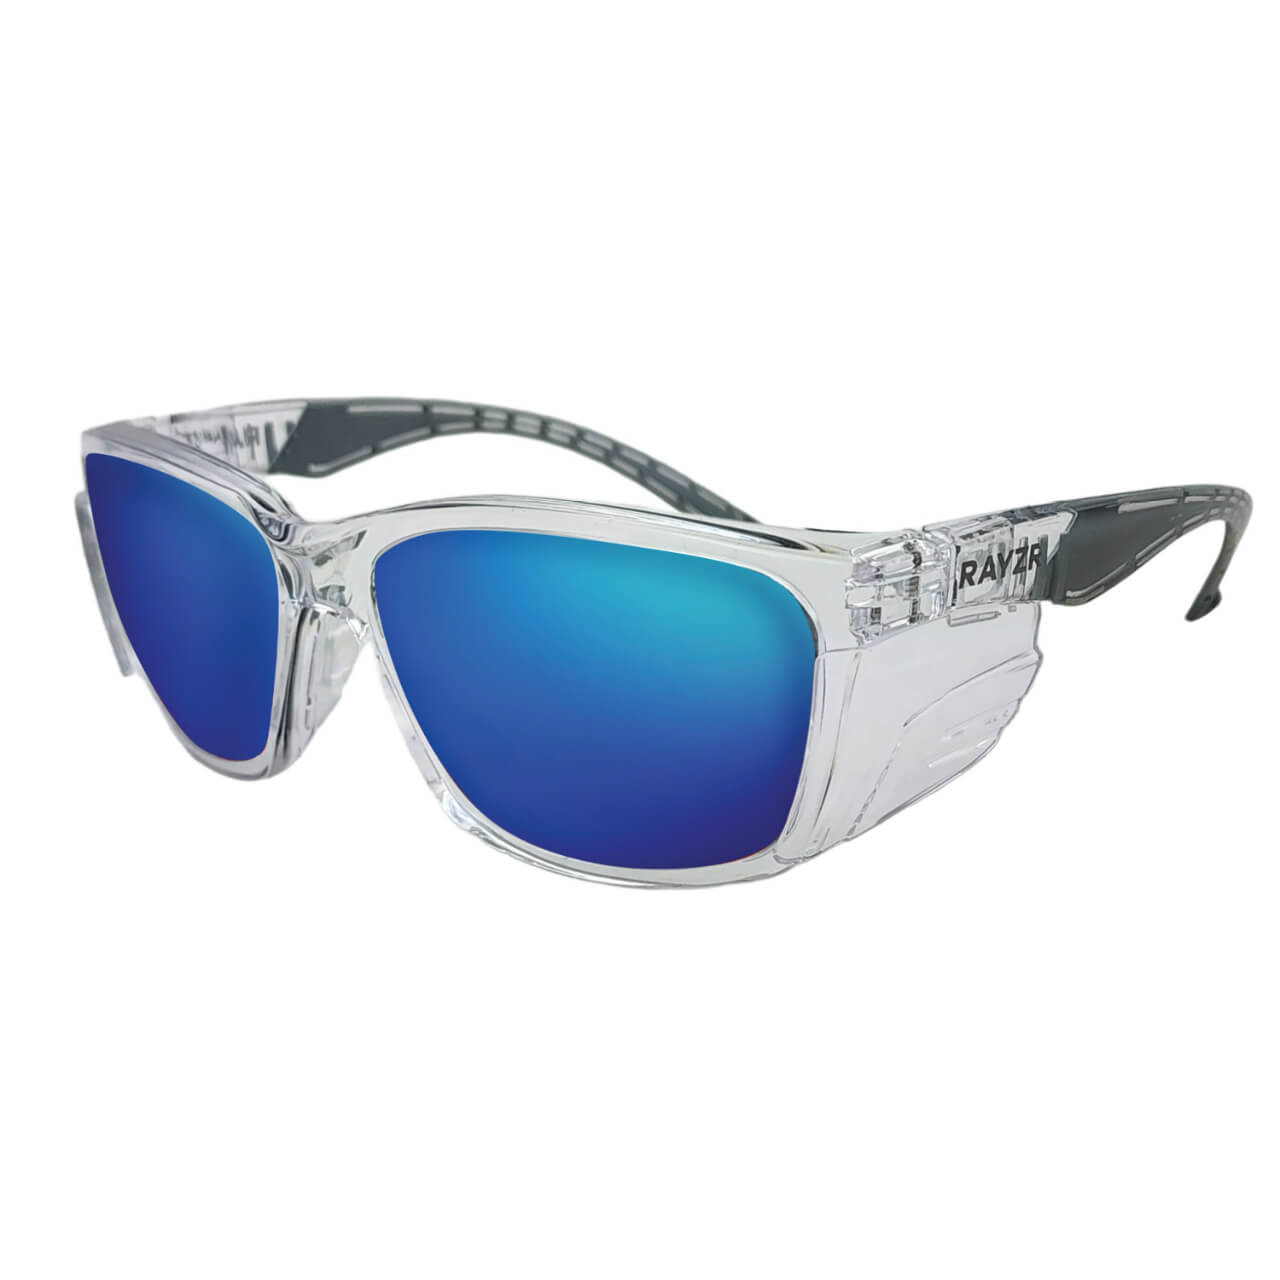 Rayzr Clear Frame Blue Mirror Lens Polarised Safety Glasses